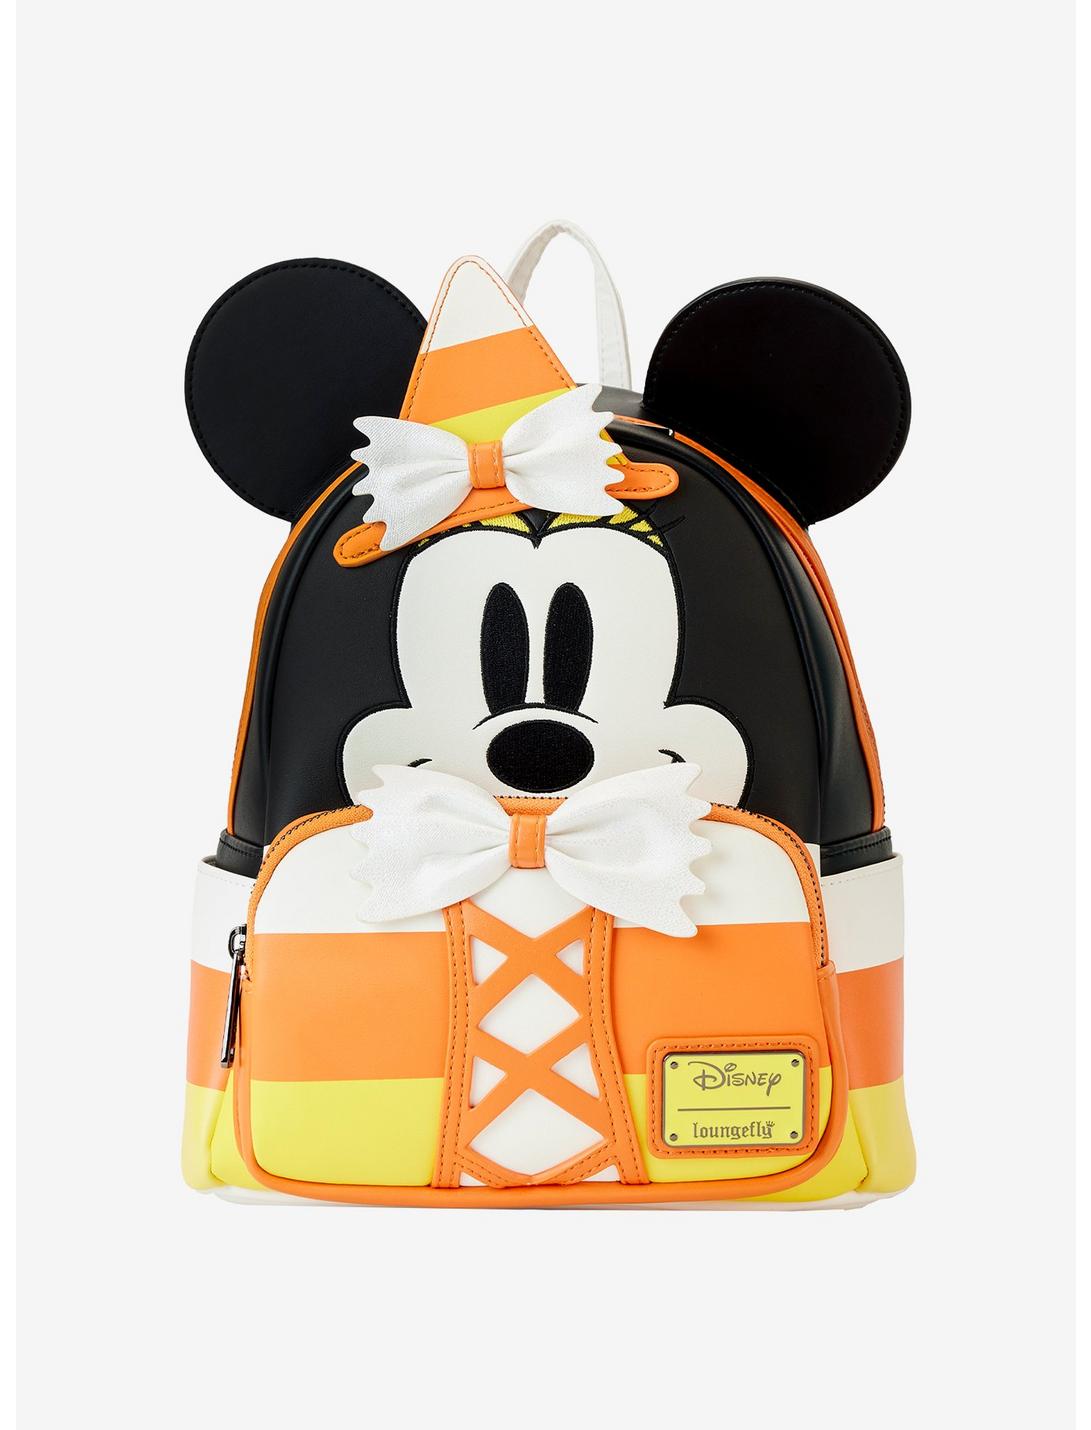 Loungefly Disney Minnie Mouse Candy Corn Glow-in-the-Dark Mini Backpack ...